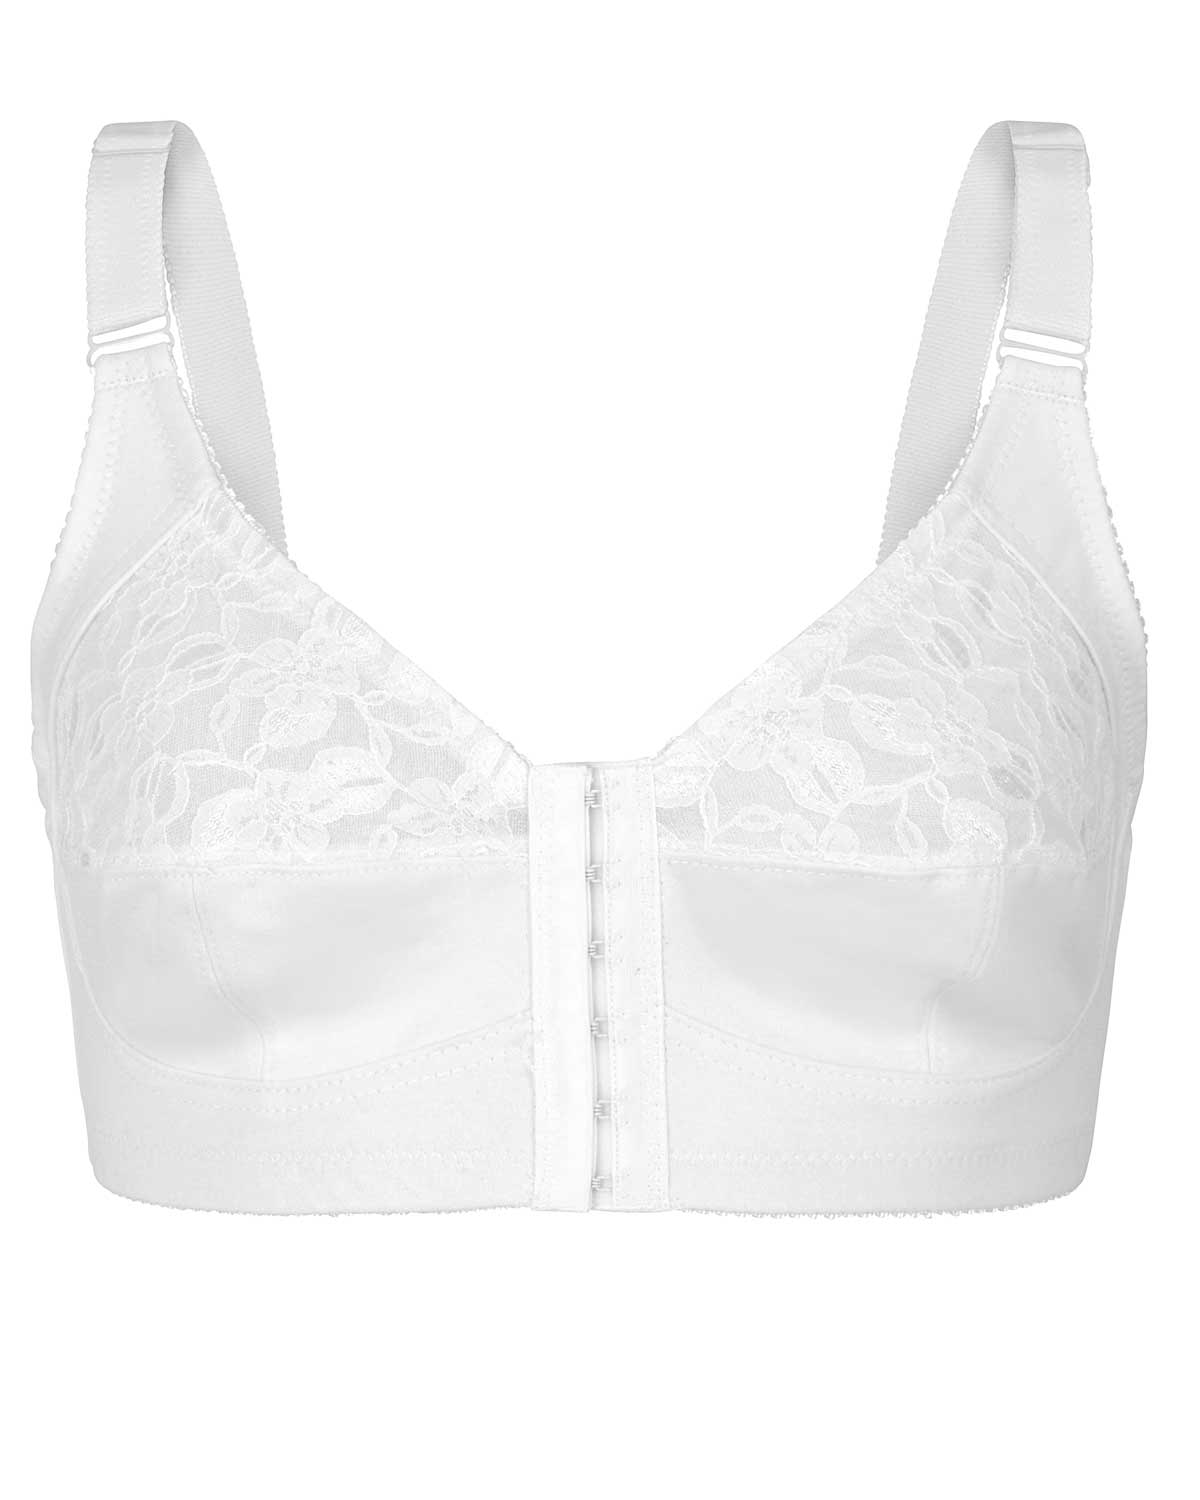 https://www.countrycollection.co.uk/assets/BlogArticles/2021/classic-lingerie-and-ladies-corsetry/front-fastening-bras-uk.jpg